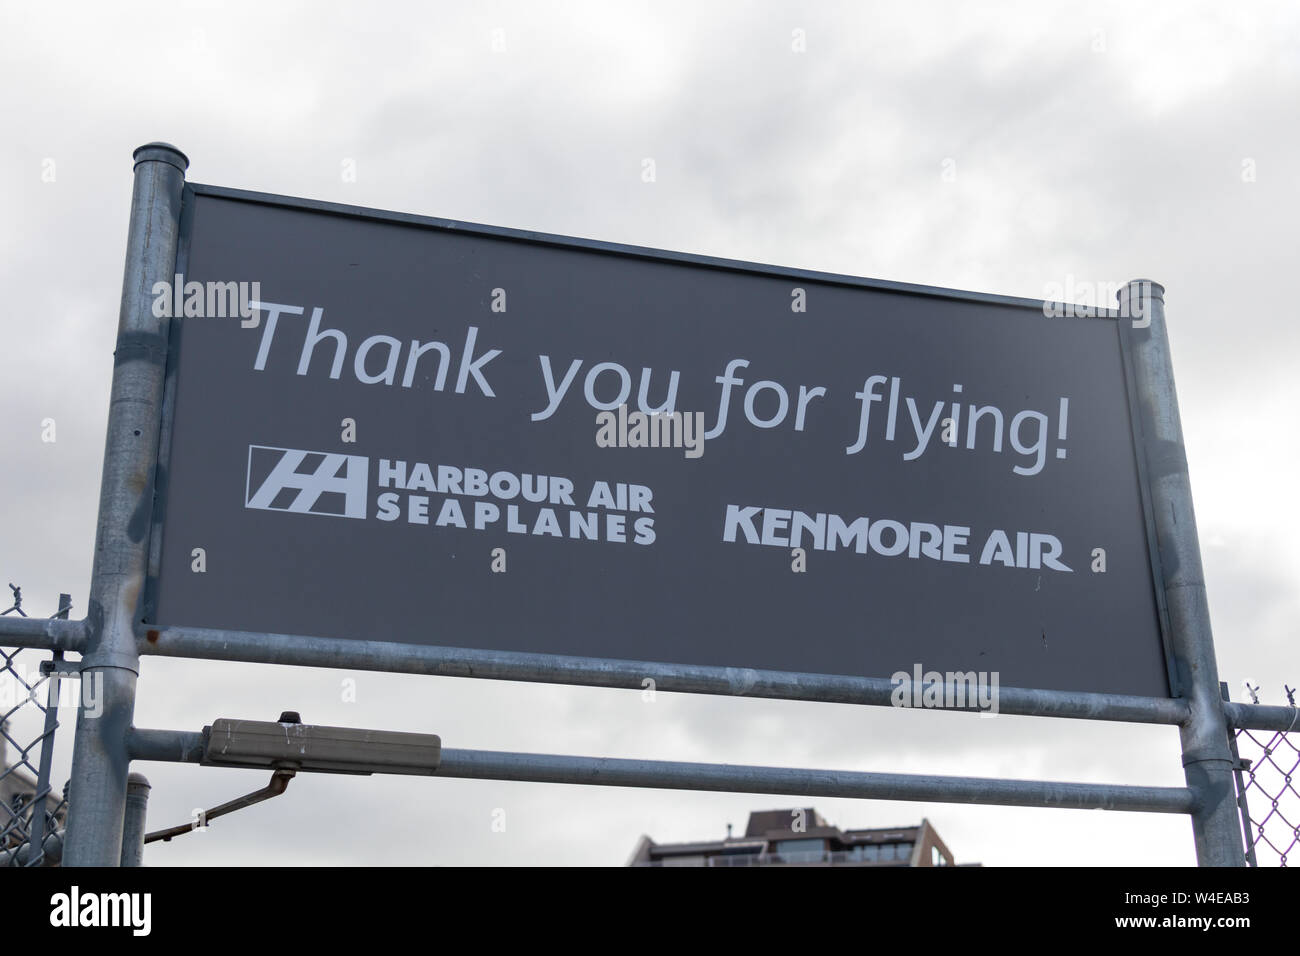 'Thank you for flying!' sign with the Harbour Air Seaplanes and Kenmore Air logos at the exit to the harbour airport in downtown Victoria, BC Stock Photo